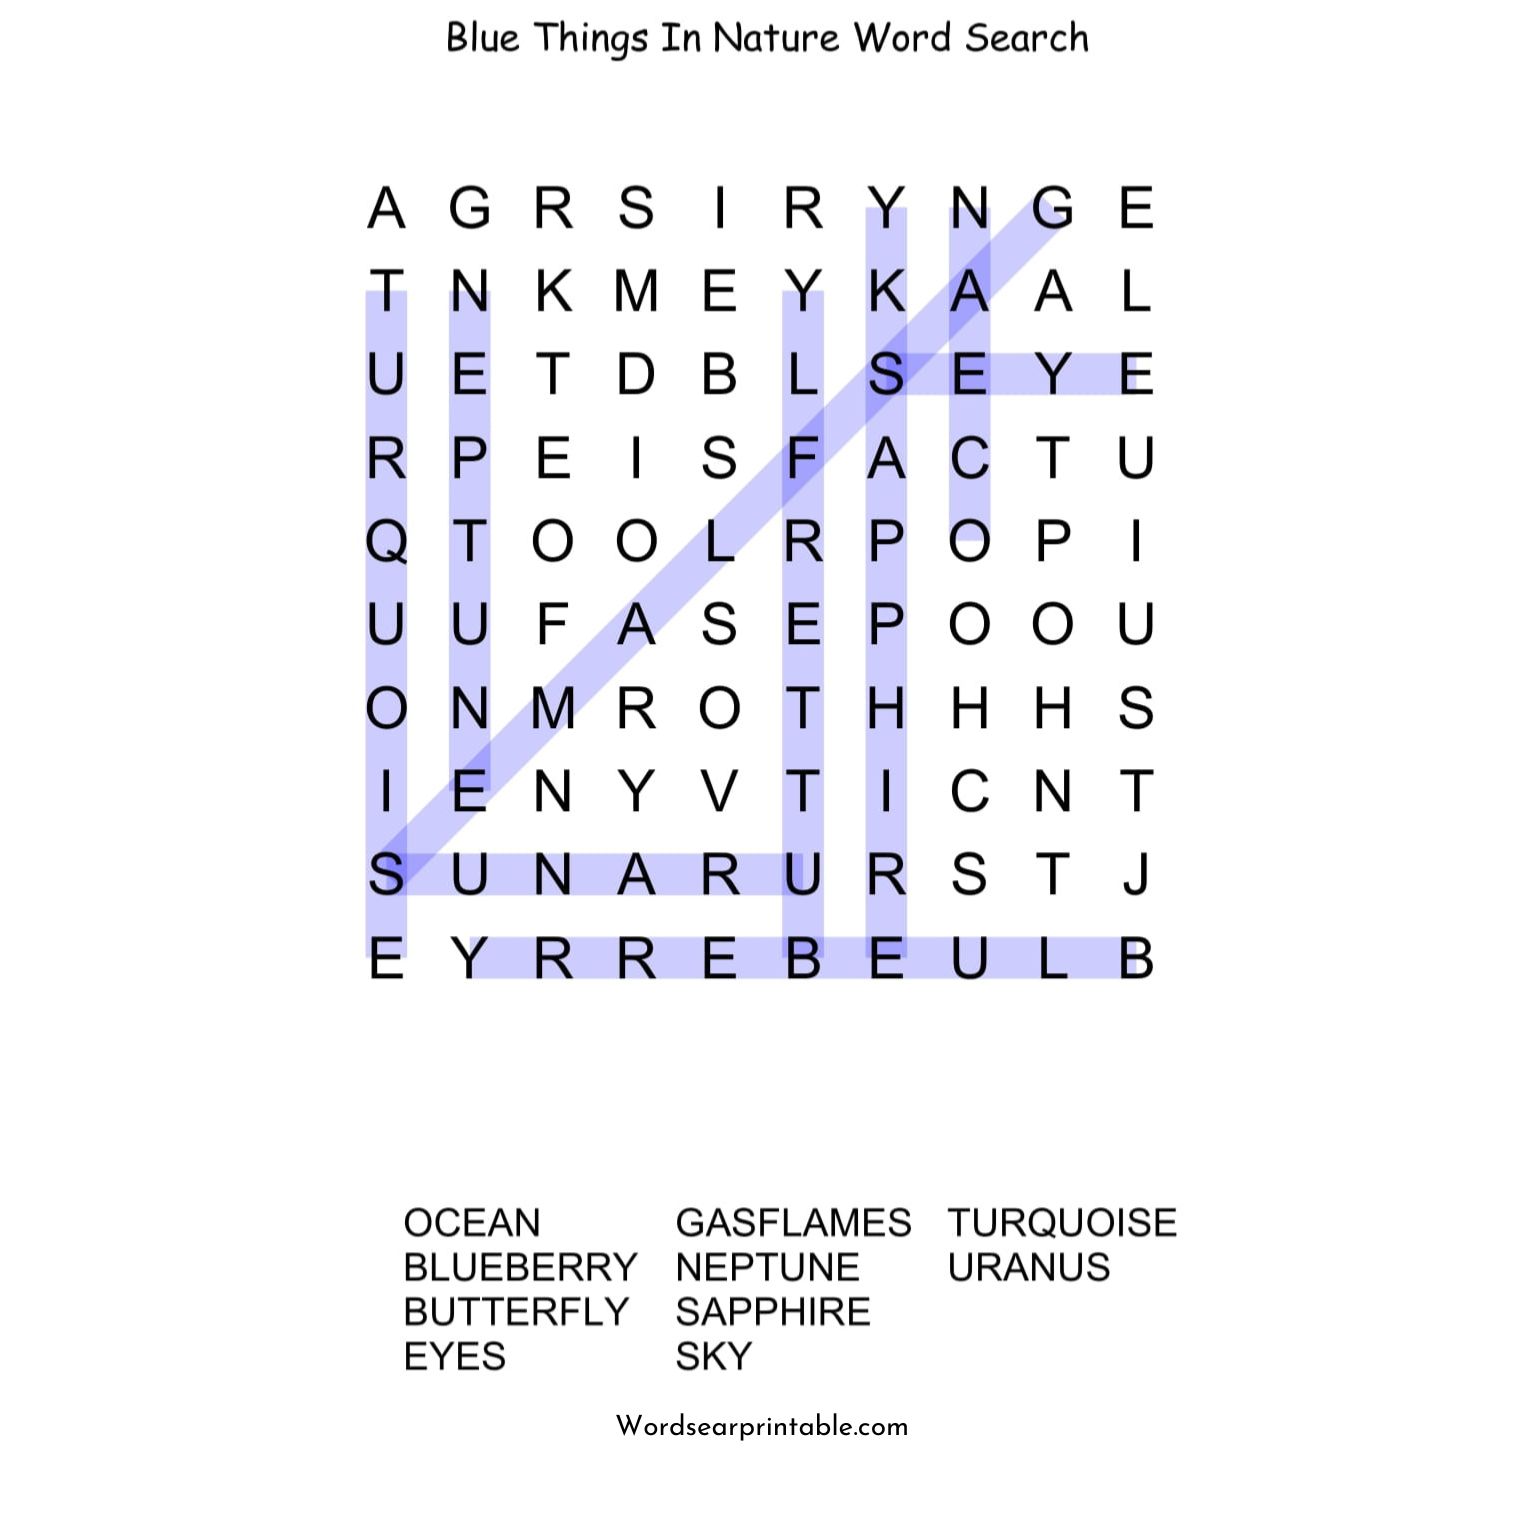 blue things in nature word search puzzle solution